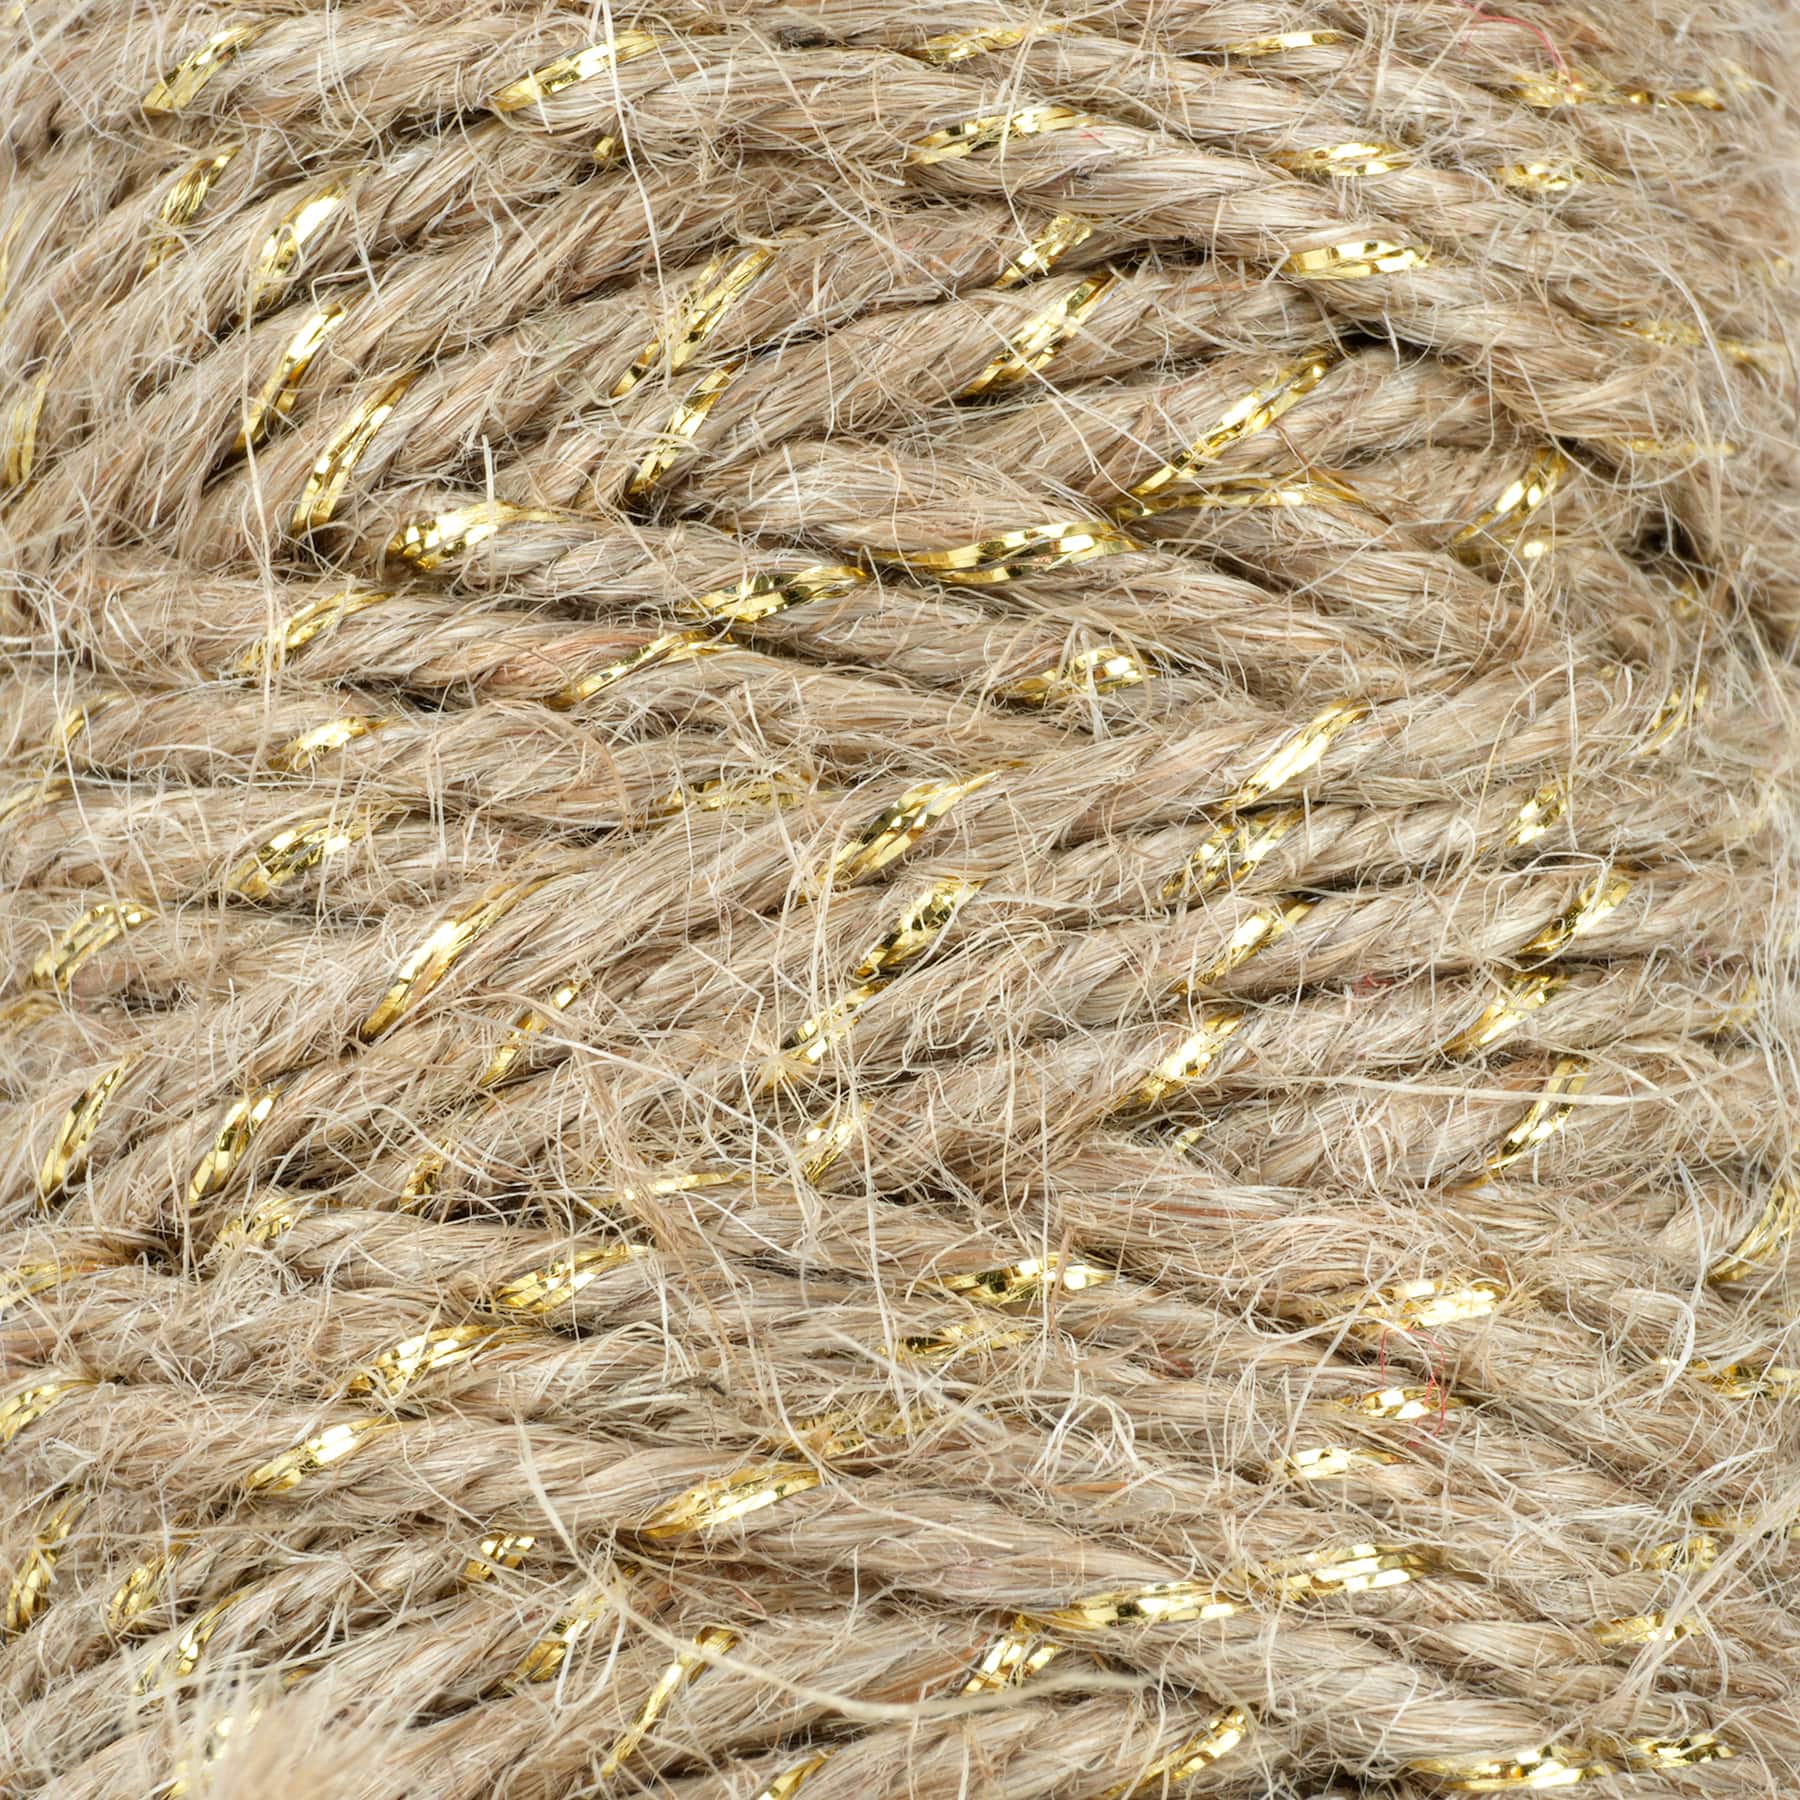 Ashland Natural CRAFT TWINE 120 Feet Crafts Gift Wrap Unbleached